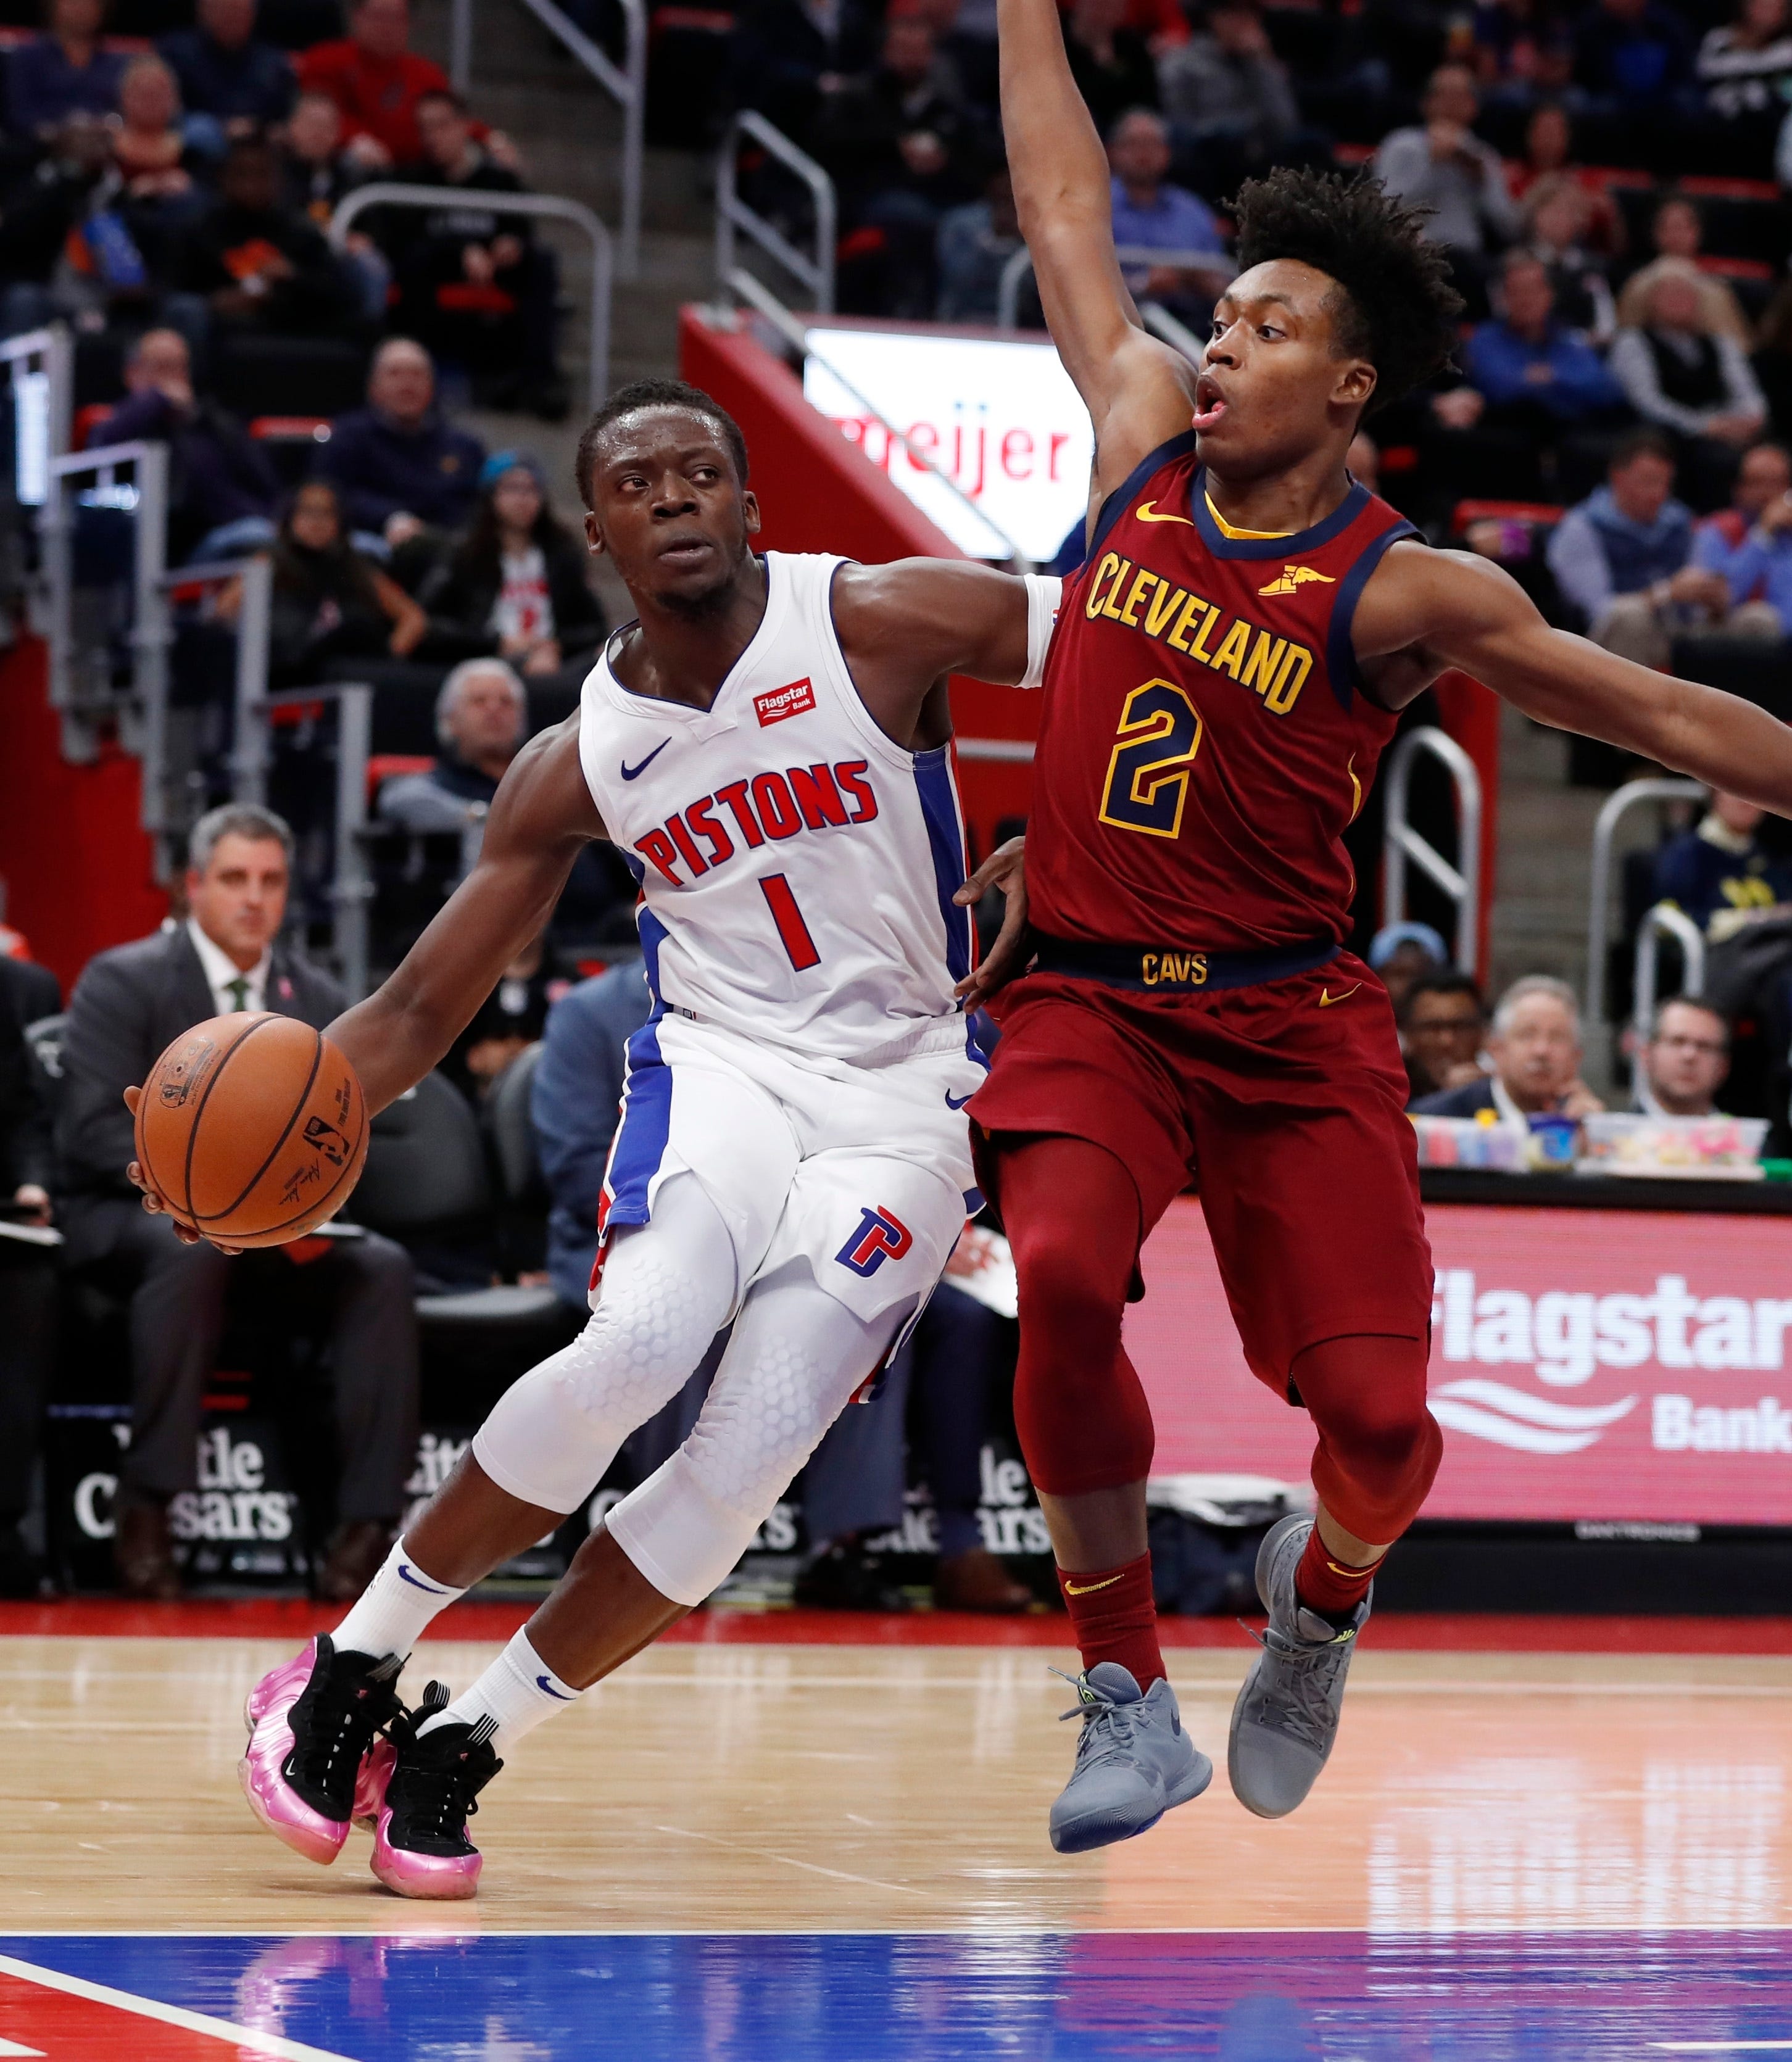 Detroit Pistons guard Reggie Jackson (1) is defended by Cleveland Cavaliers guard Collin Sexton (2) during the first half.